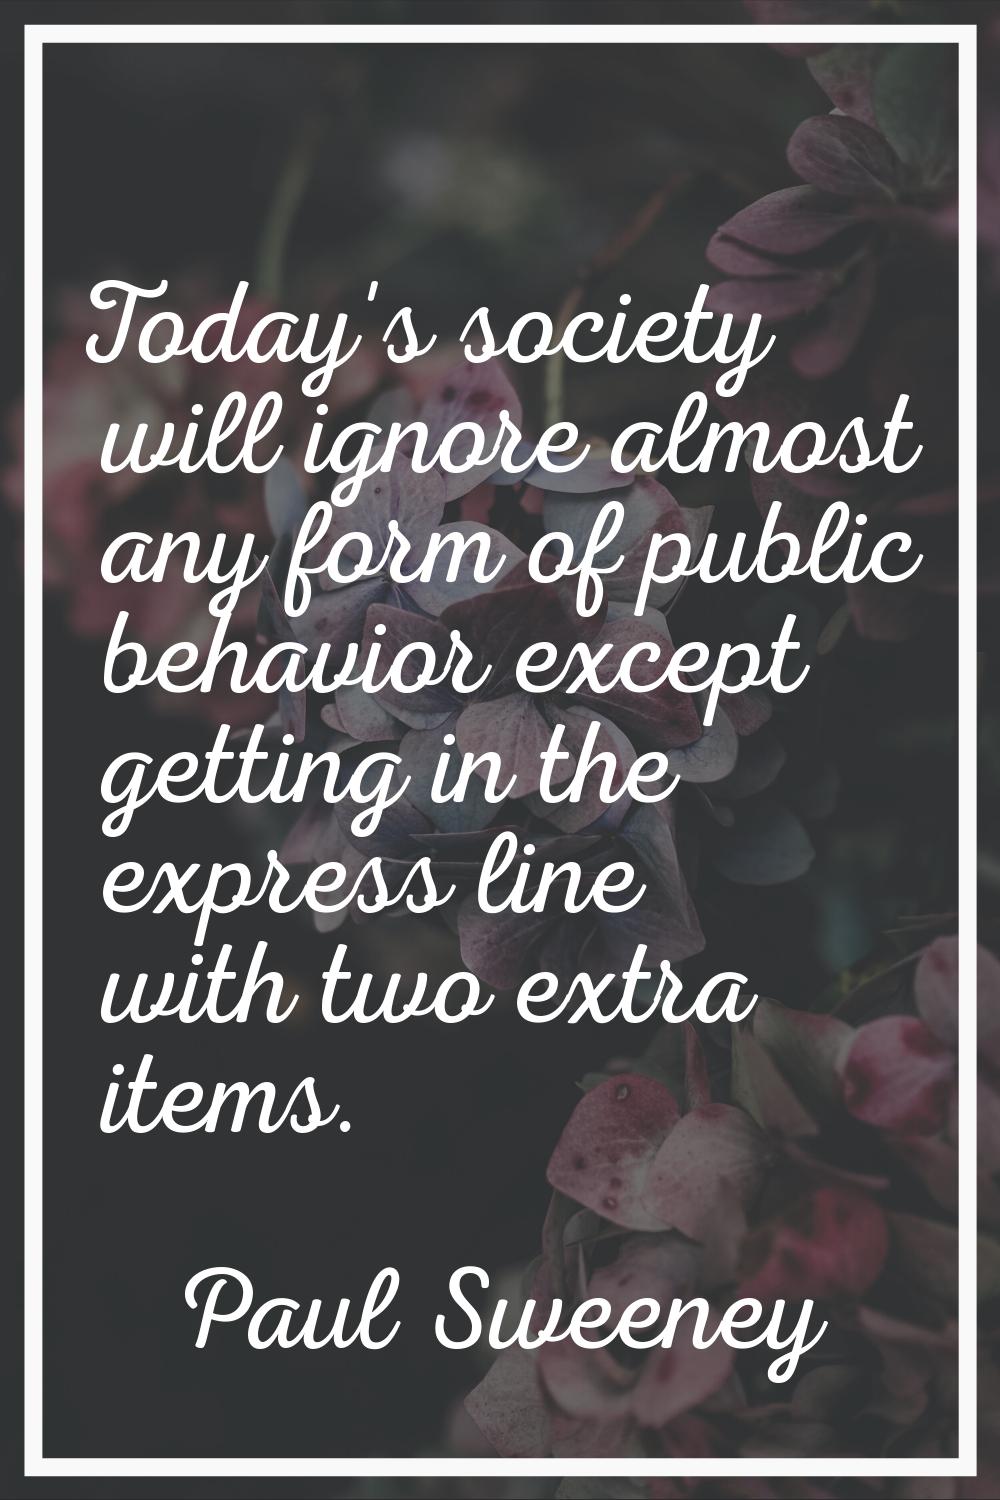 Today's society will ignore almost any form of public behavior except getting in the express line w